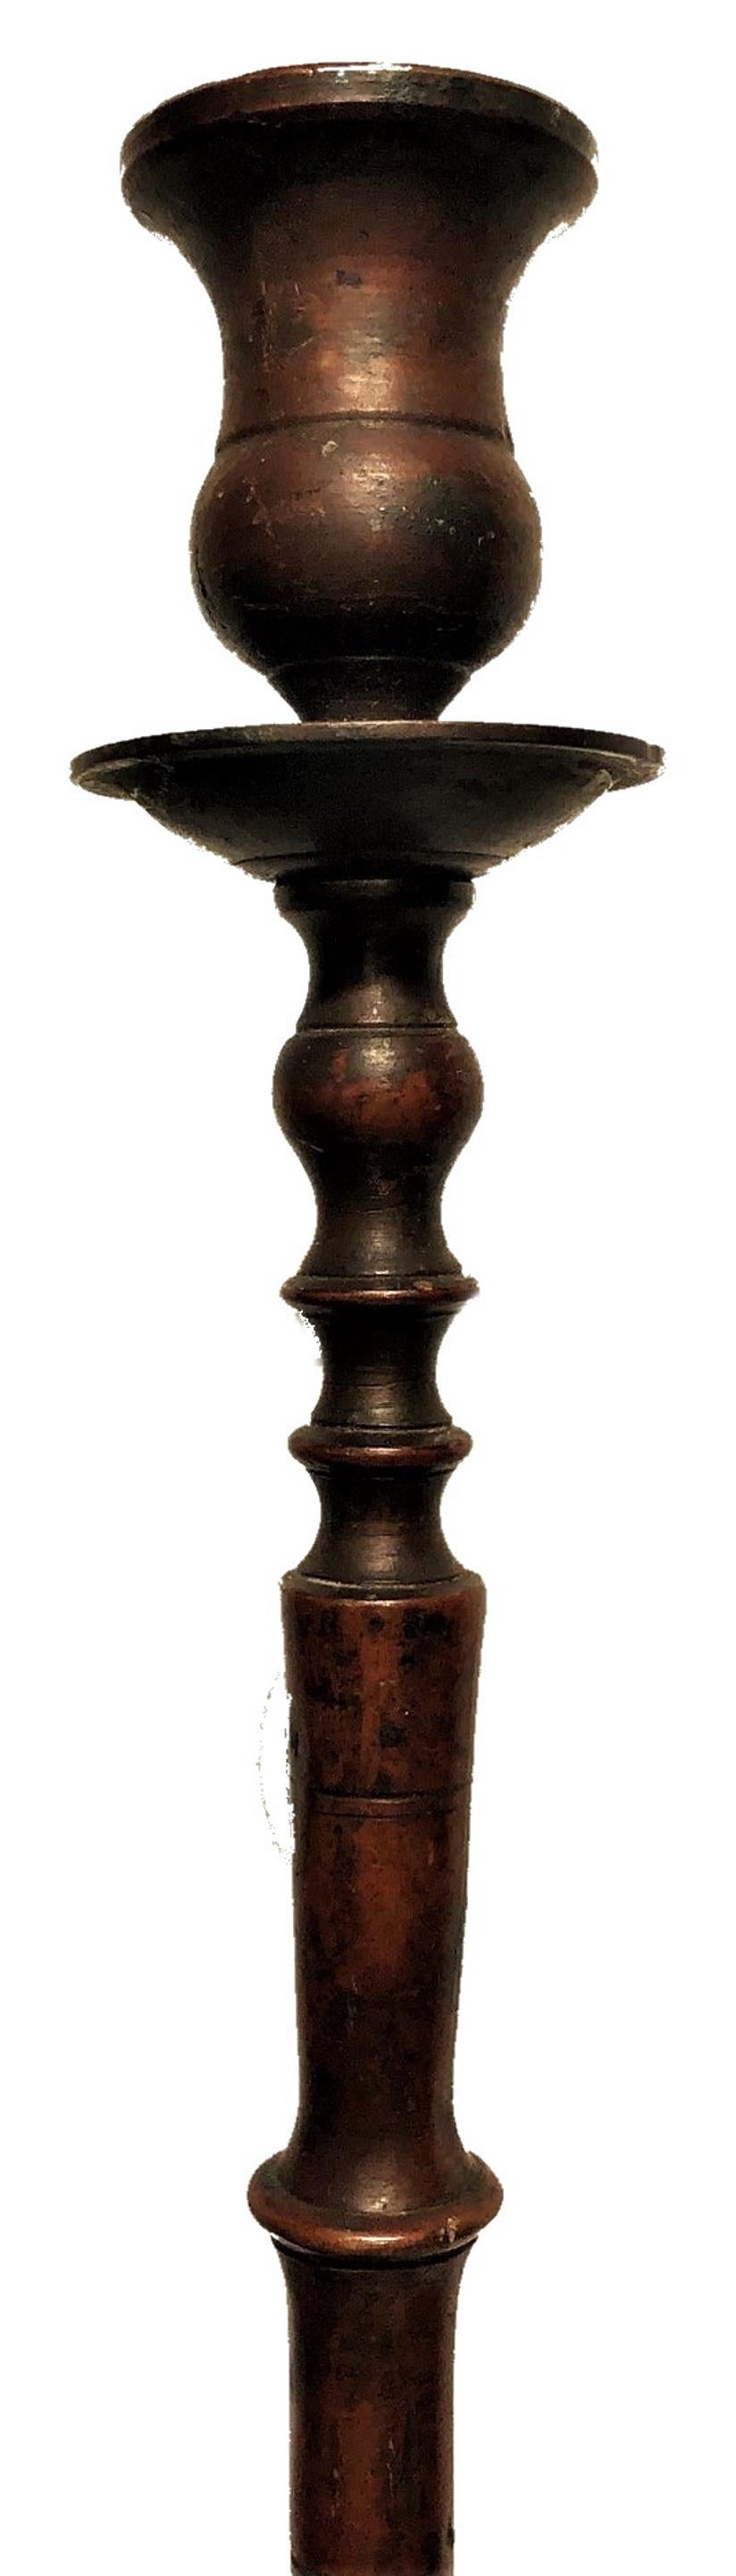 Cast Aesthetic Movement Pair of Bronze Candlesticks in Manner of Tiffany, ca. 1880s For Sale